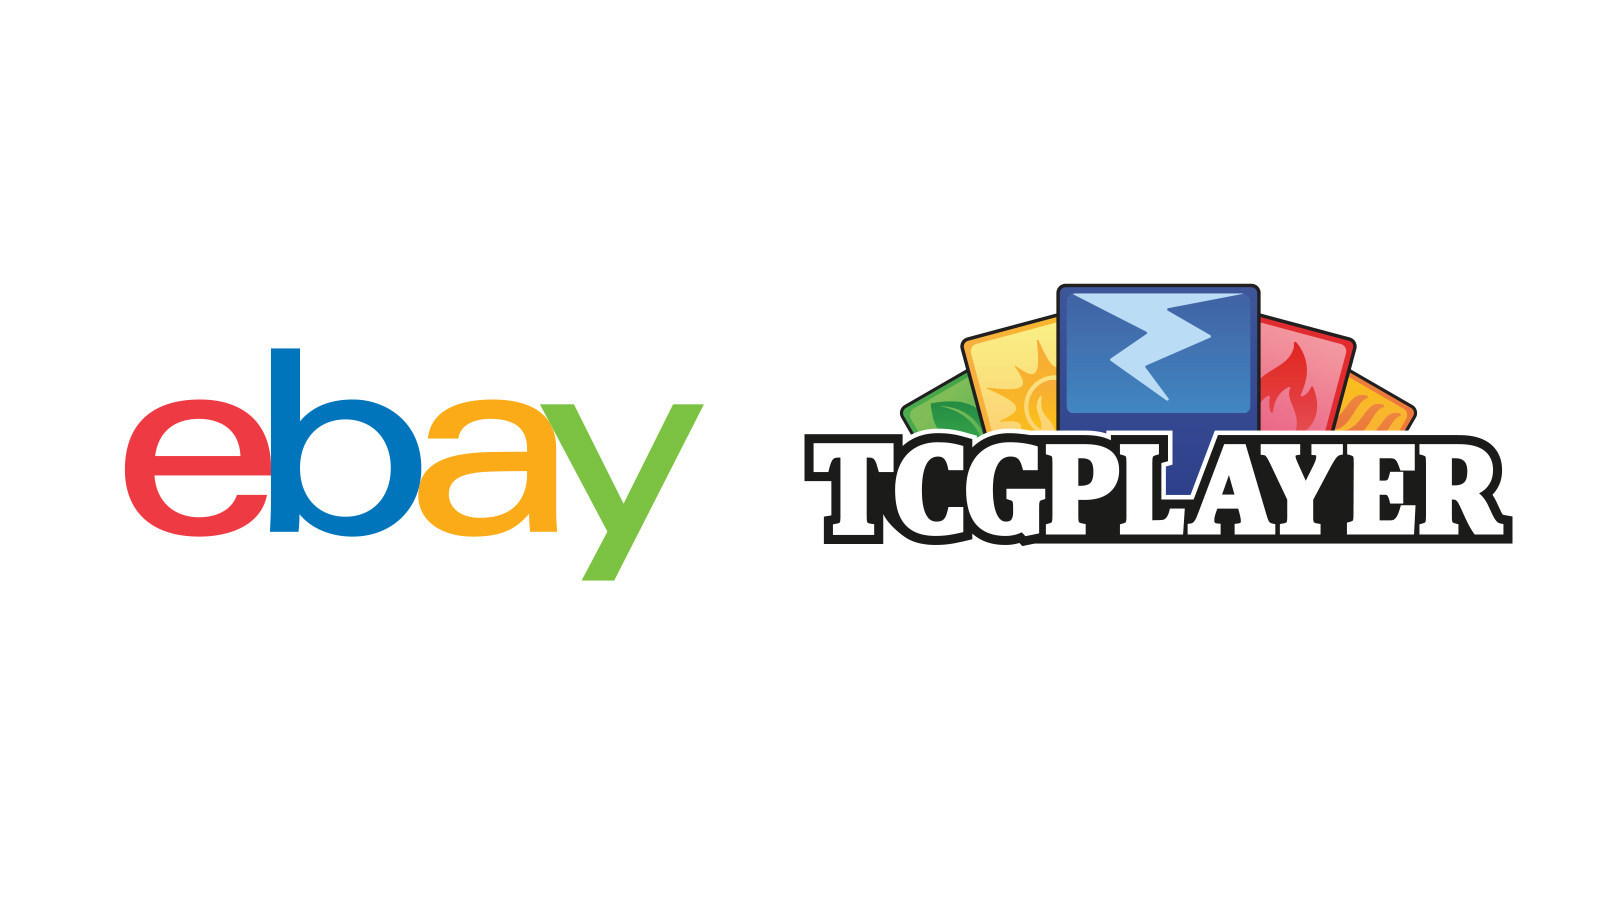 eBay has Entered into an Agreement to Acquire TCGplayer